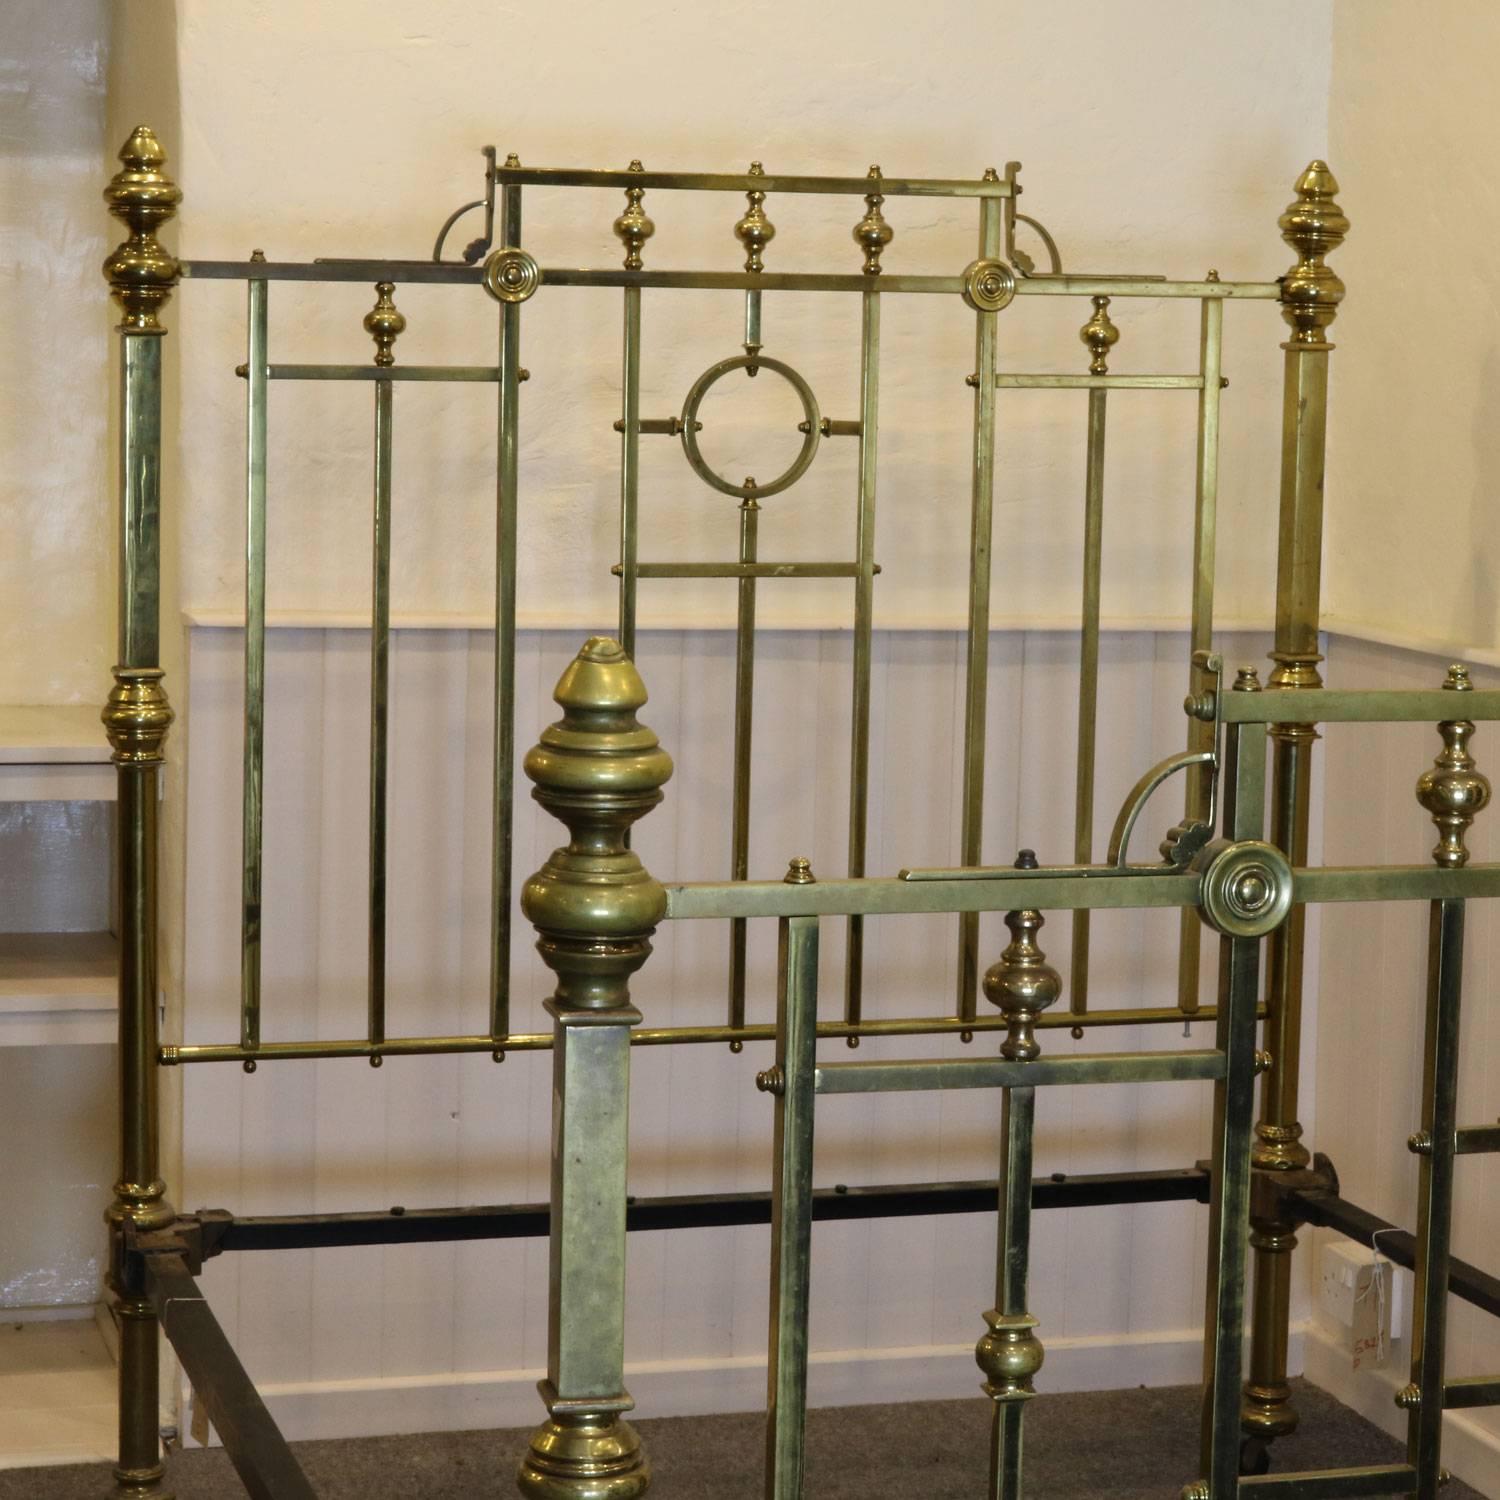 Edwardian all brass bed. The bed accepts a British double (4ft 6in wide). The price is for the bed frame alone.

The price is for the bed frame alone. The base, mattress, bedding and linen are extra. 

The dimensions of this bed are: Absolute width: